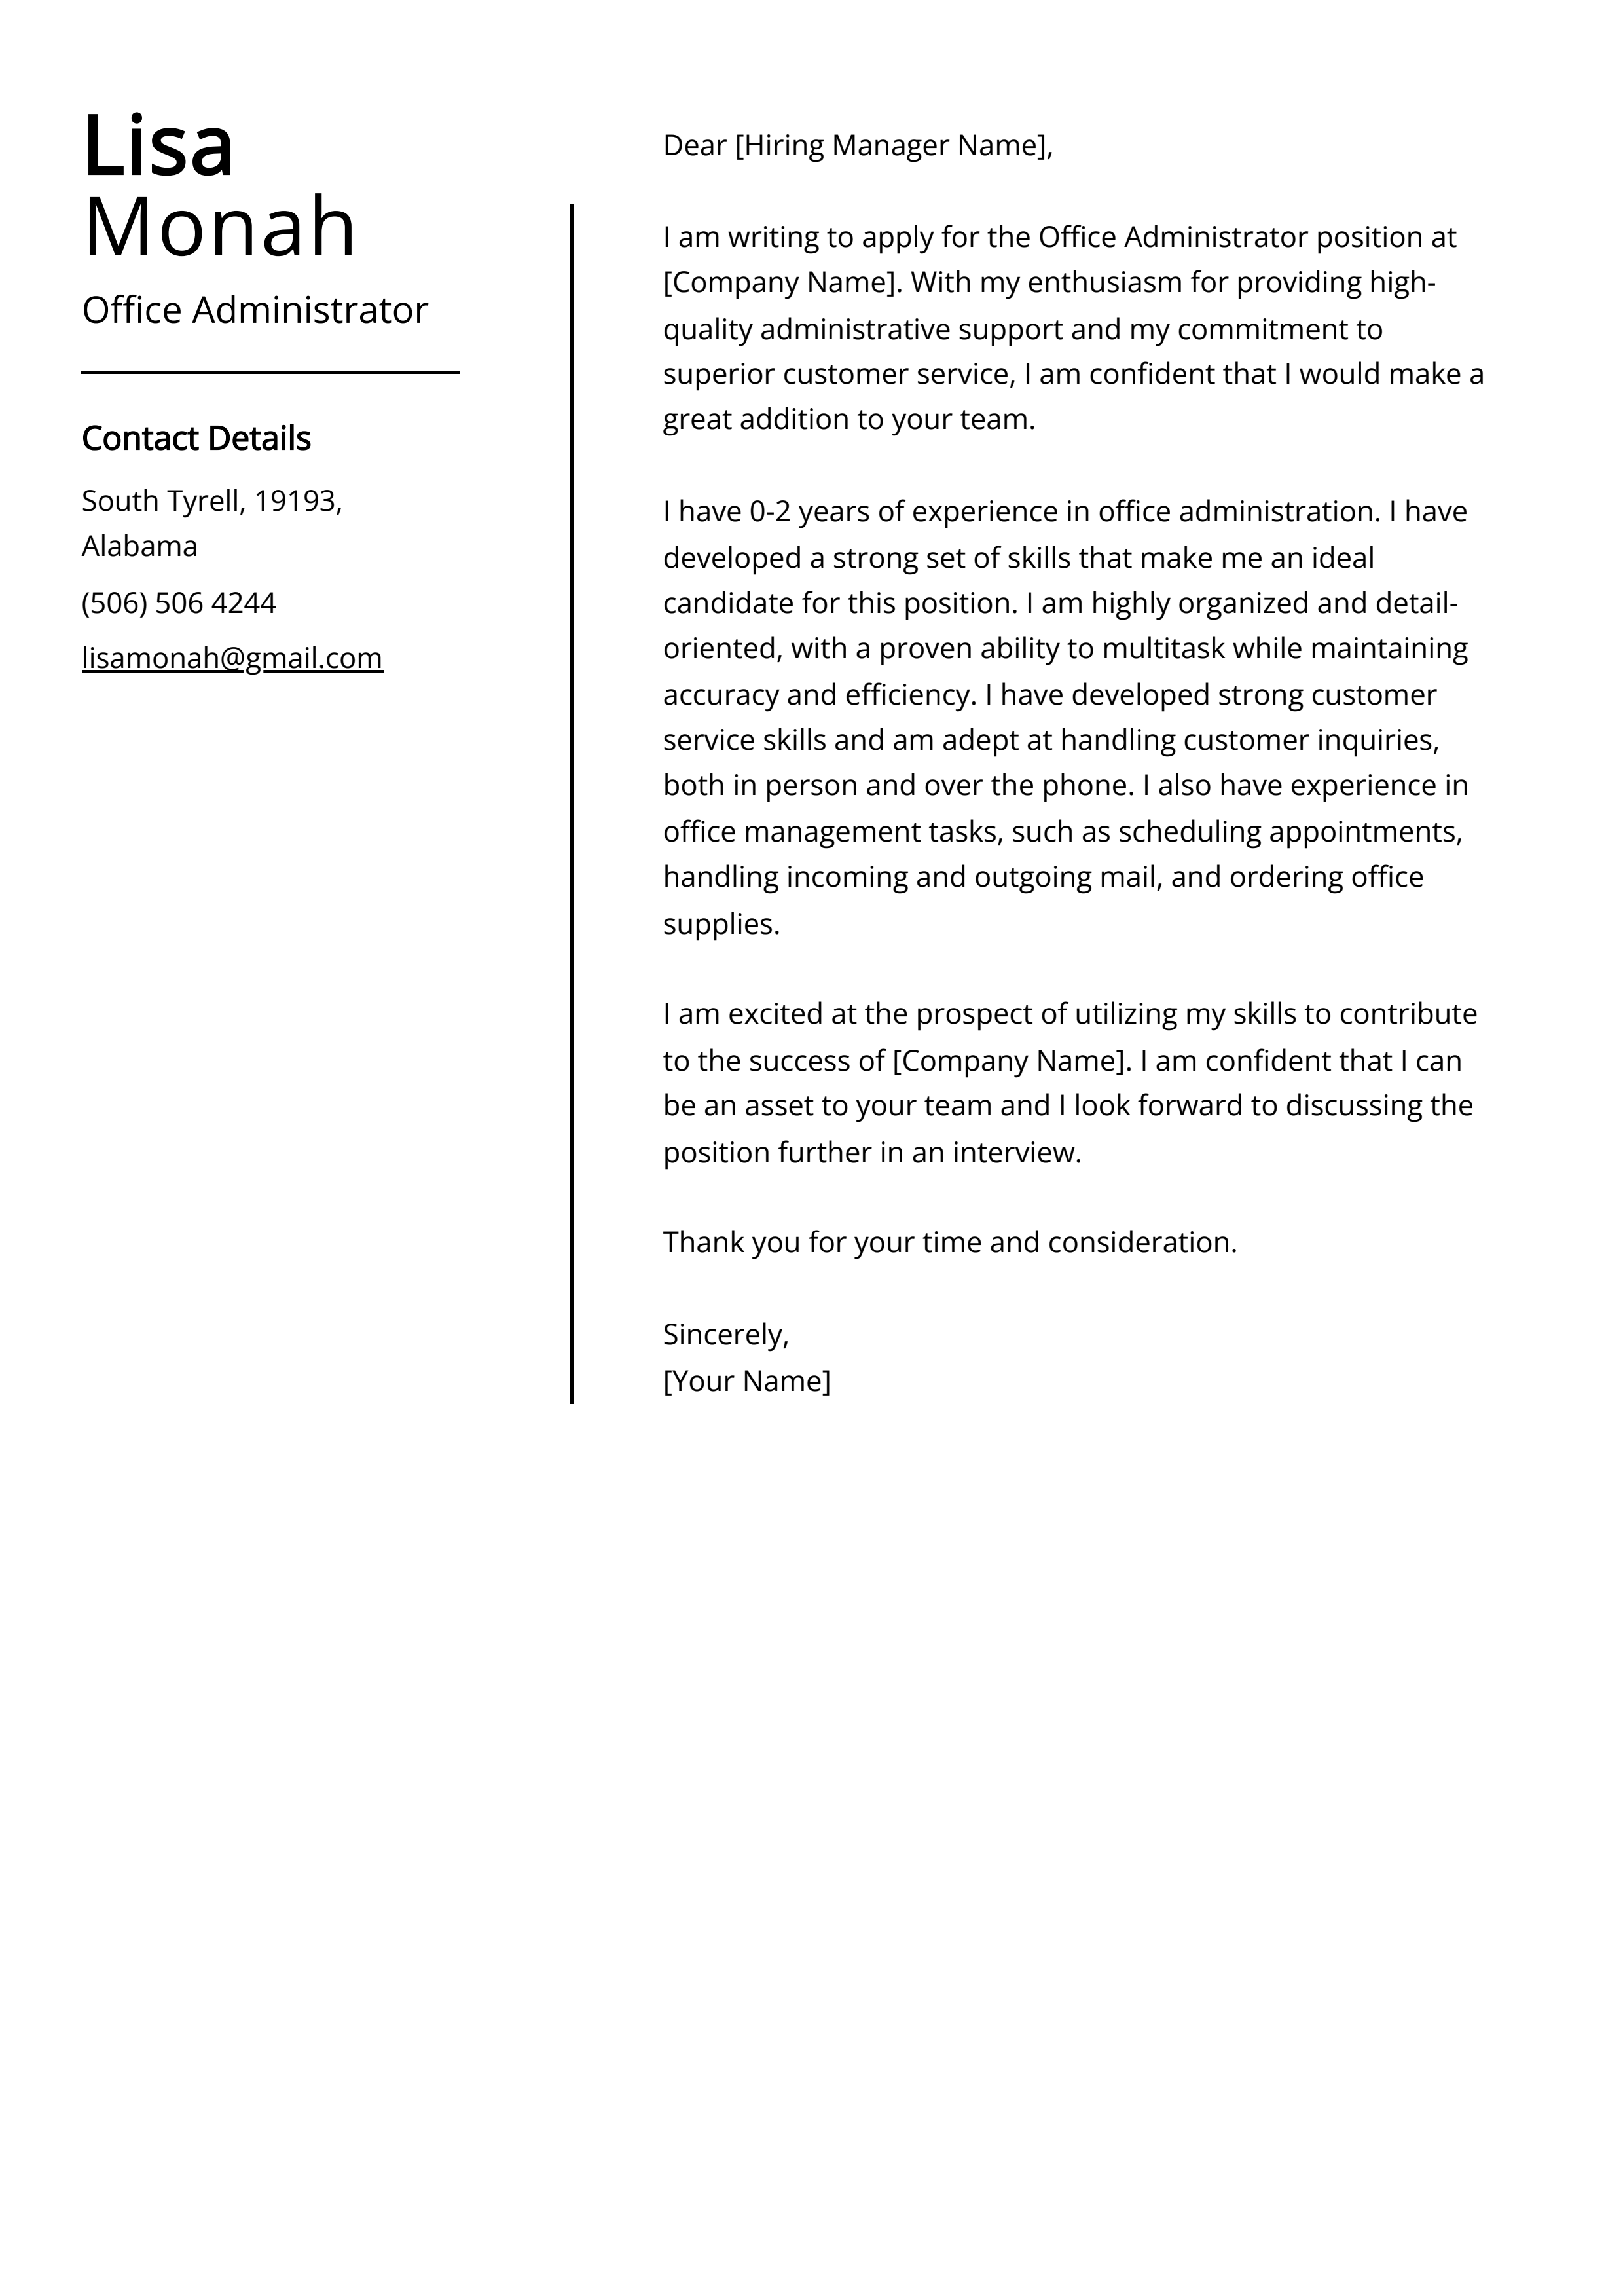 Office Administrator Cover Letter Example